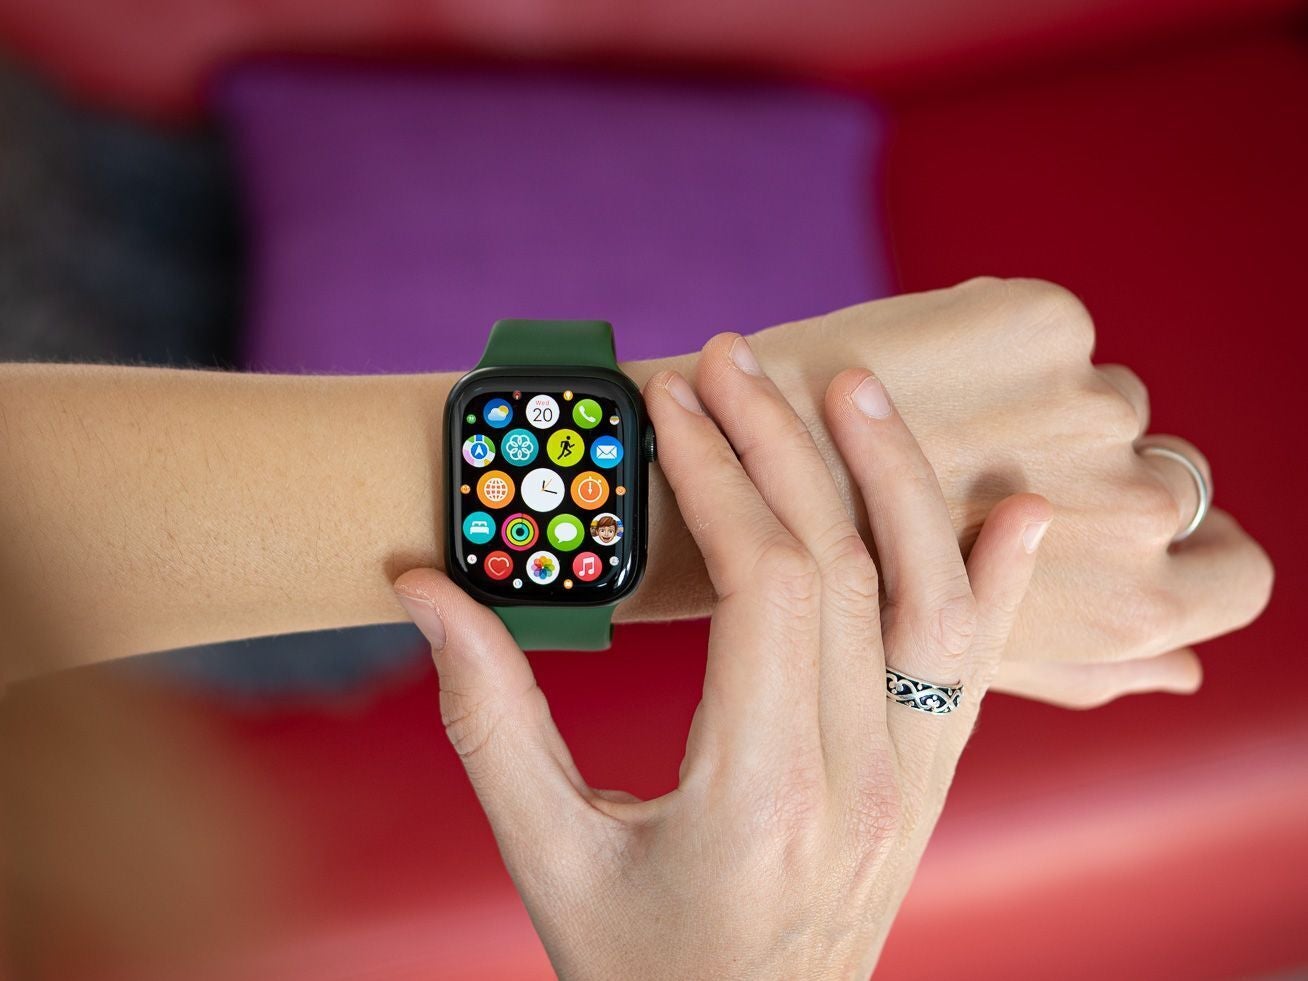 Ten McDolars say that the fake Apple Watch doesn't have this many apps! | Image credit - PhoneArena - You wouldn’t believe how much AirPods and Apple Watch fakes got seized at this airport